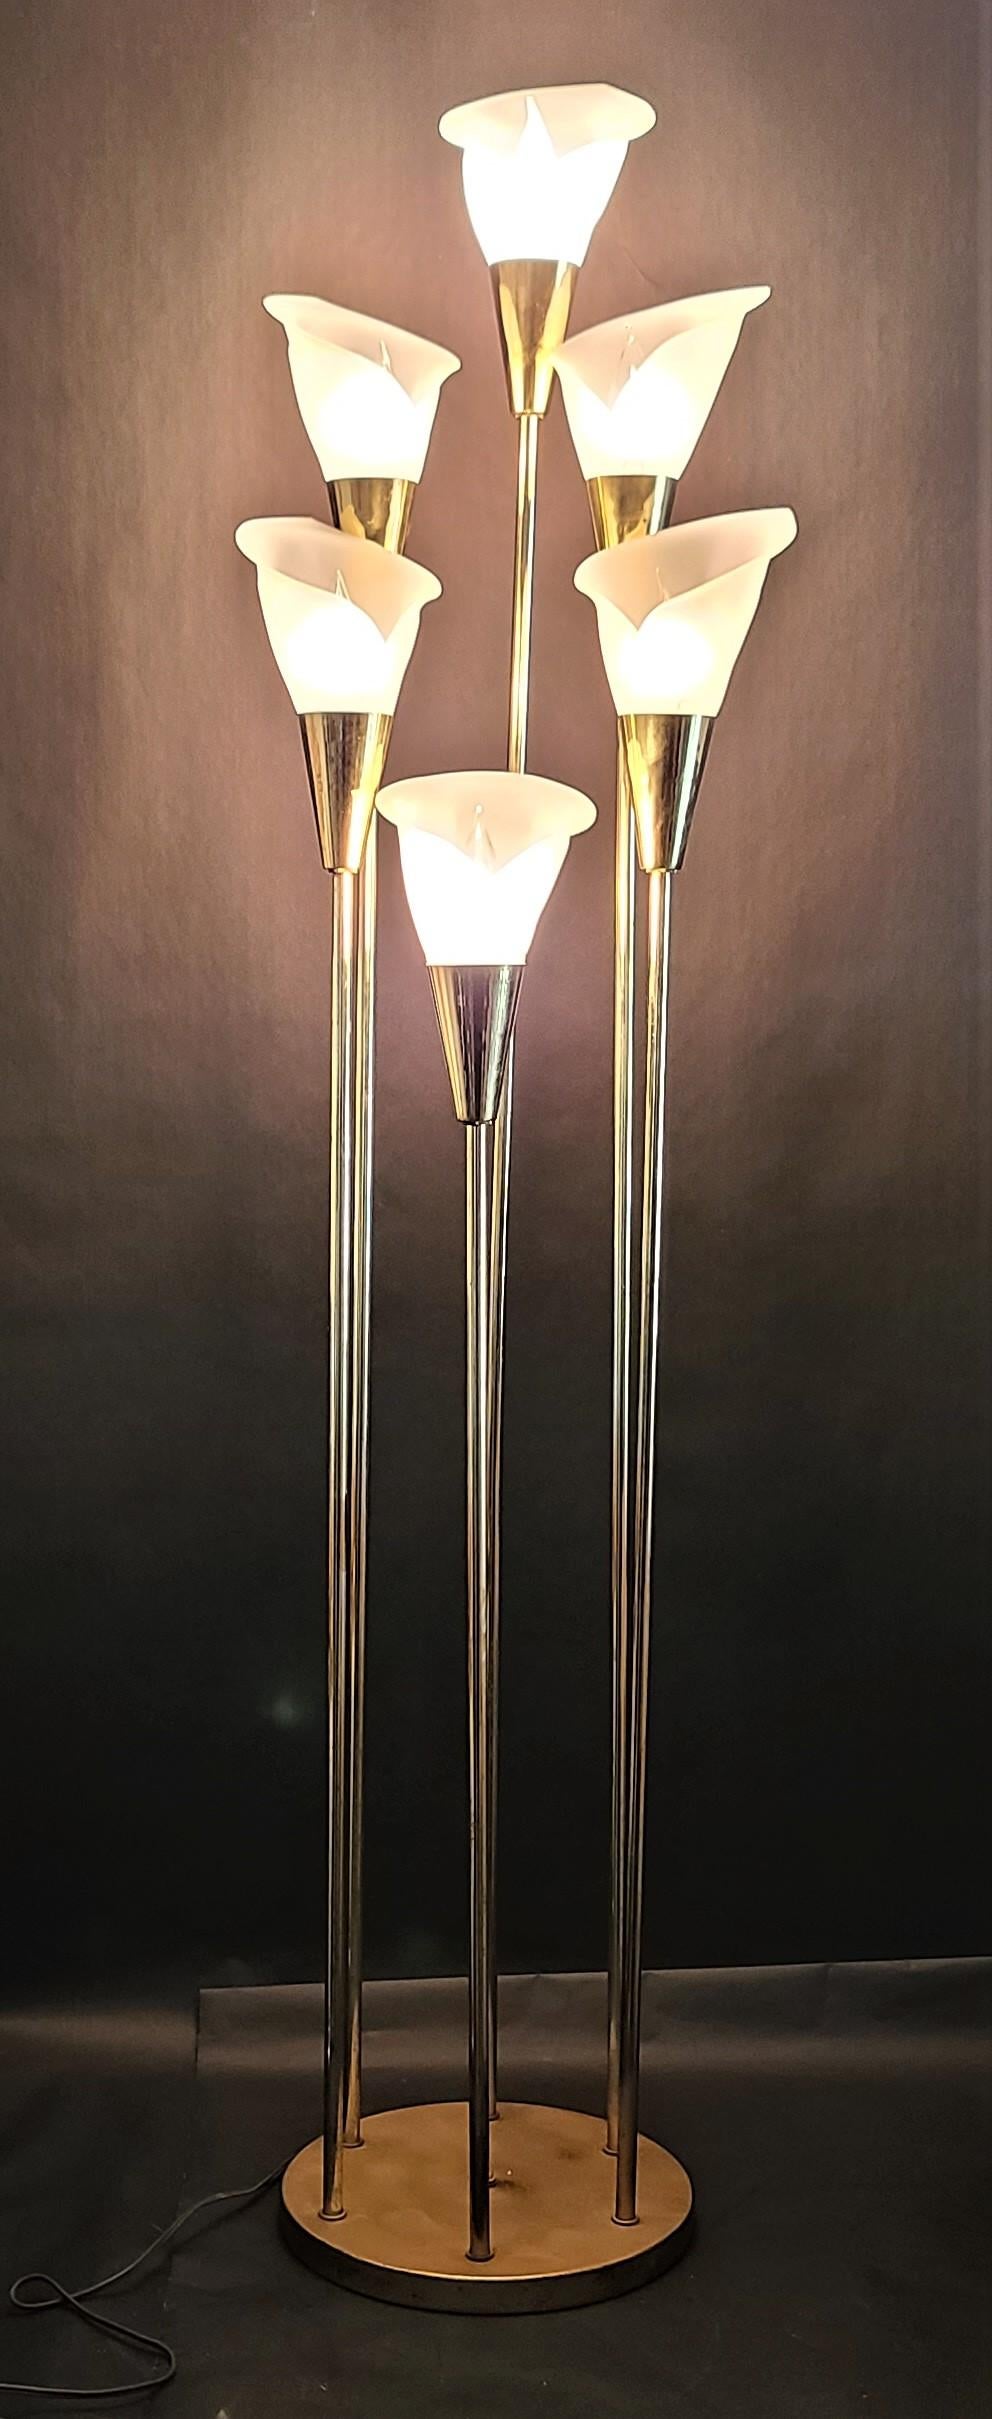 Offering one of our recent Palm Beach Estate fine lighting acquisitions of a
1960s Hollywood Regency 6 light white calla lily flower brass floor lamp 58